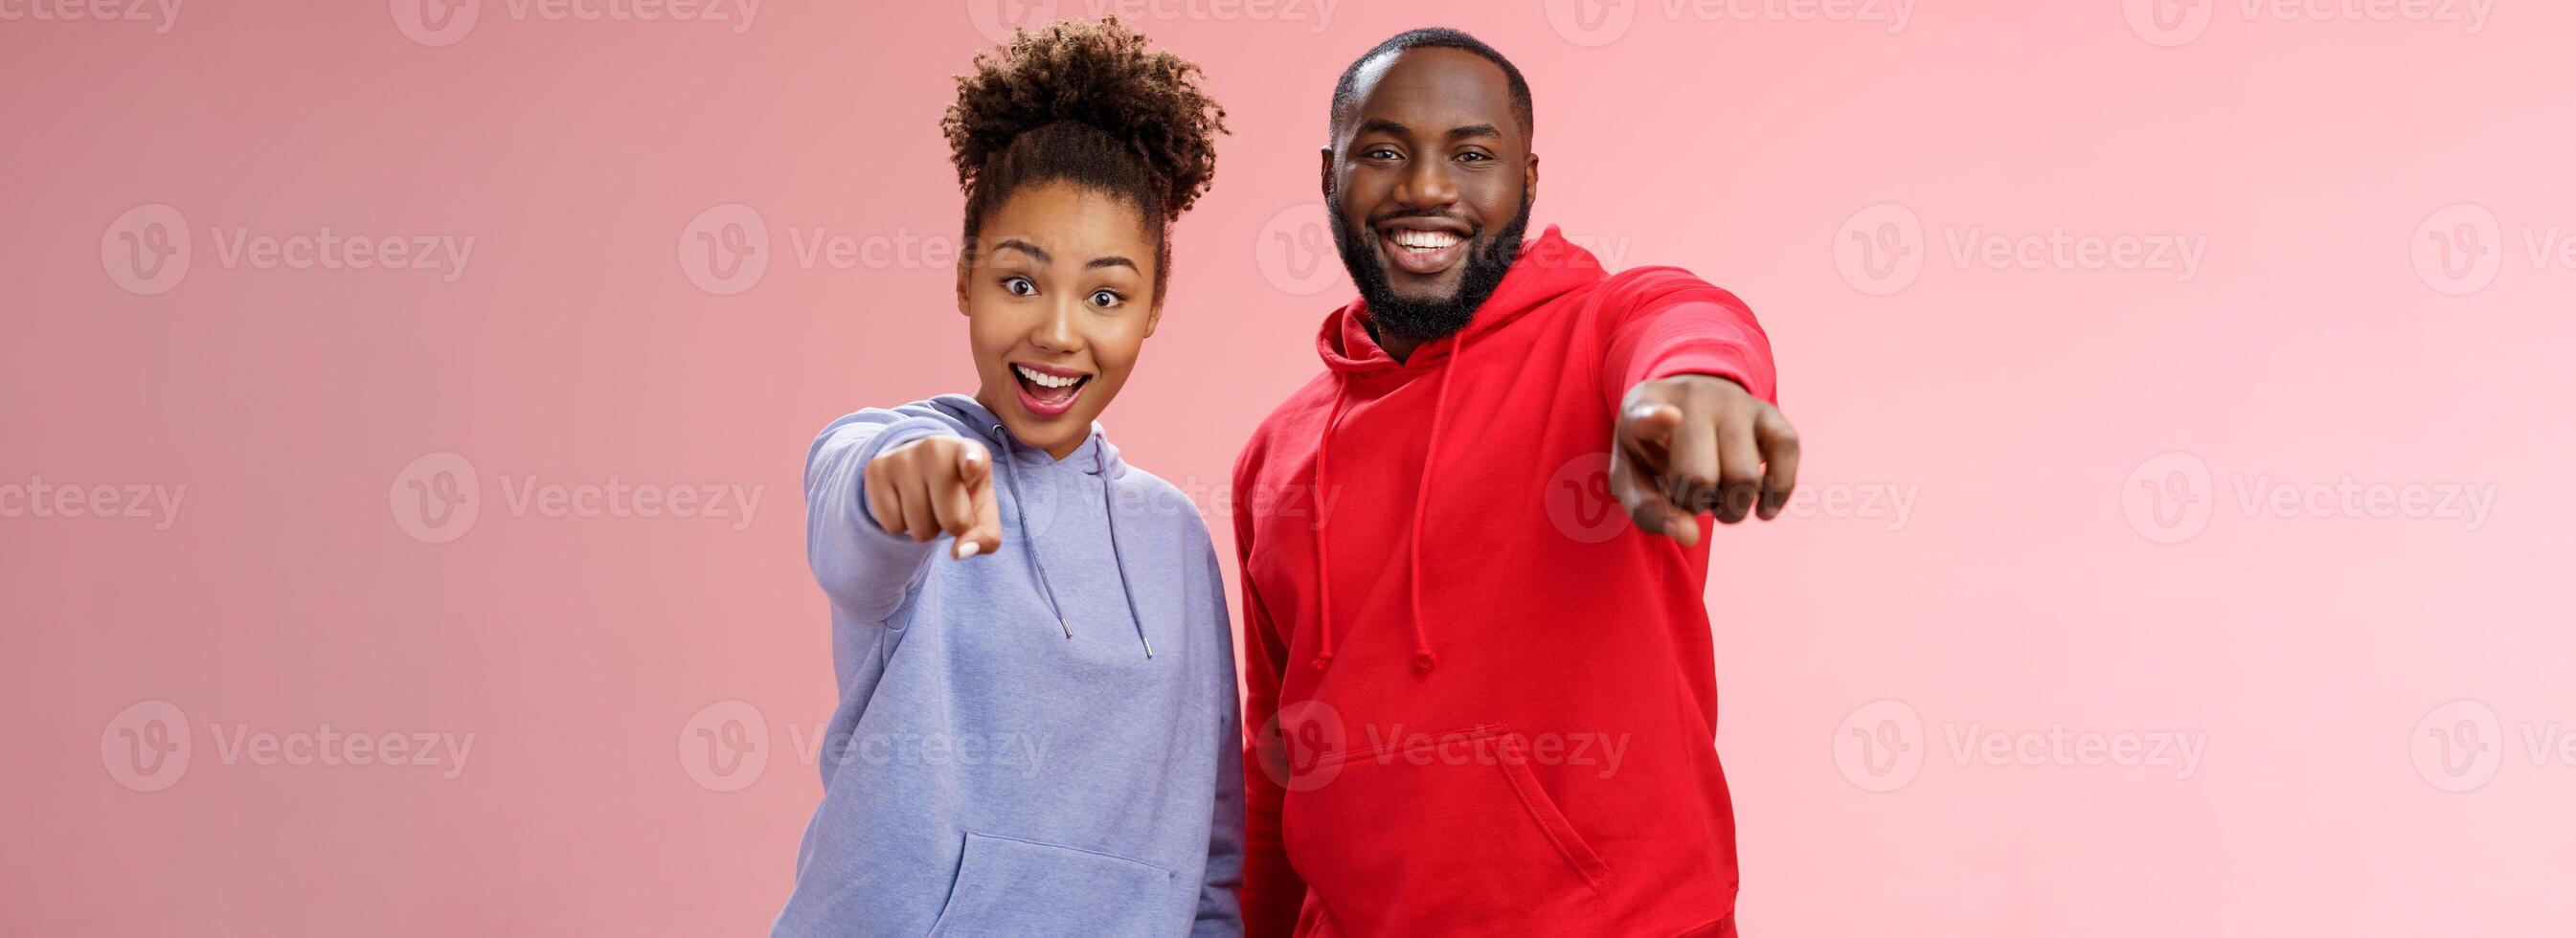 Joyful young attractive happy african-american couple vacation enjoying interesting tour standing impressed amazed pink background pointing index fingers camera awesome curious object photo